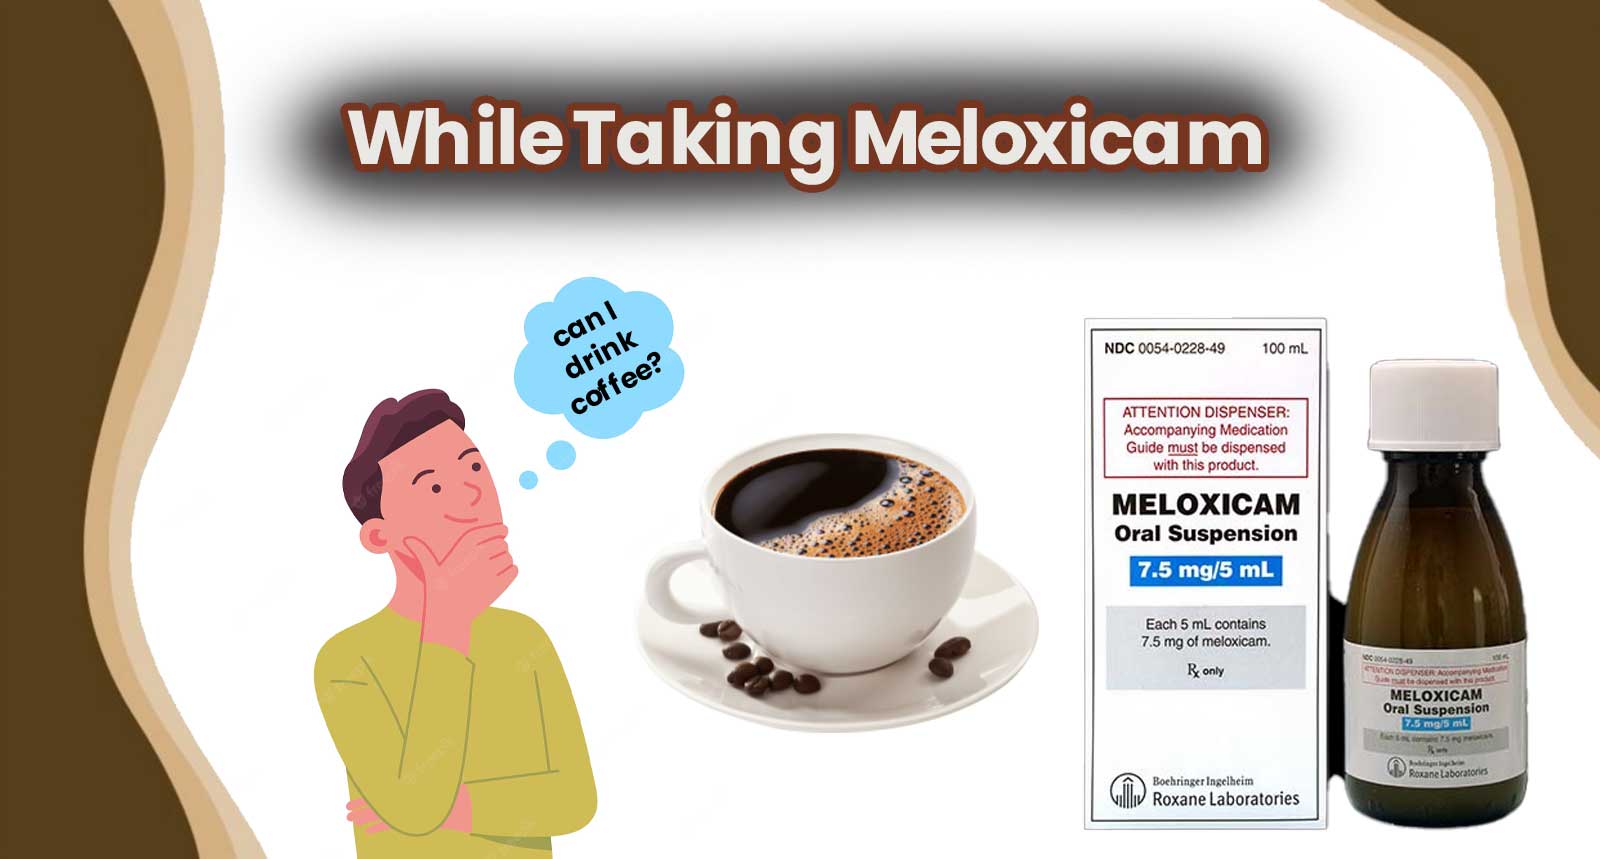 can i drink coffee while taking meloxicam